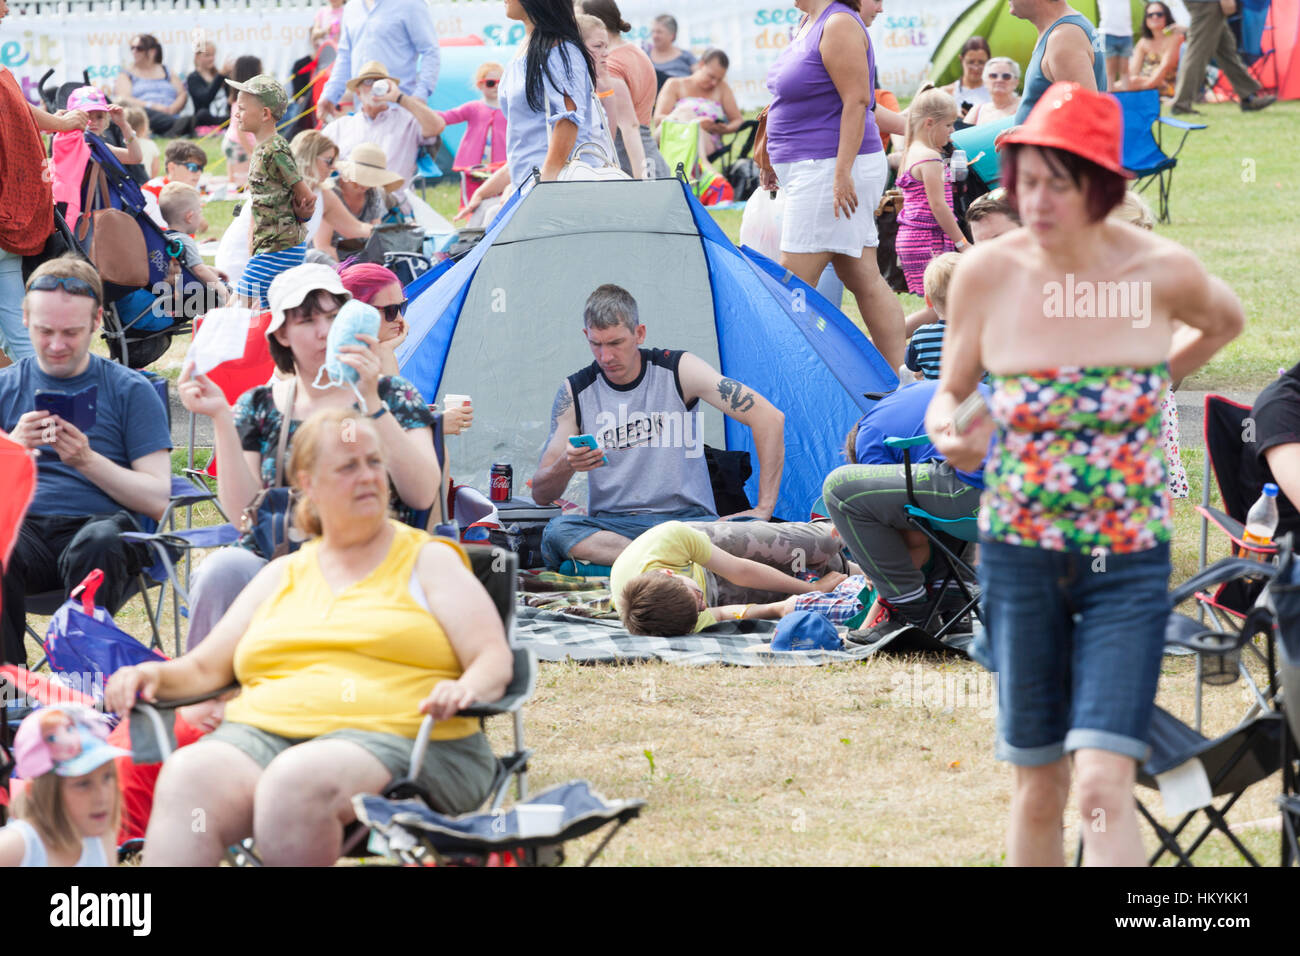 A man checking his phone while sitting in a tent surrounded by people Stock Photo